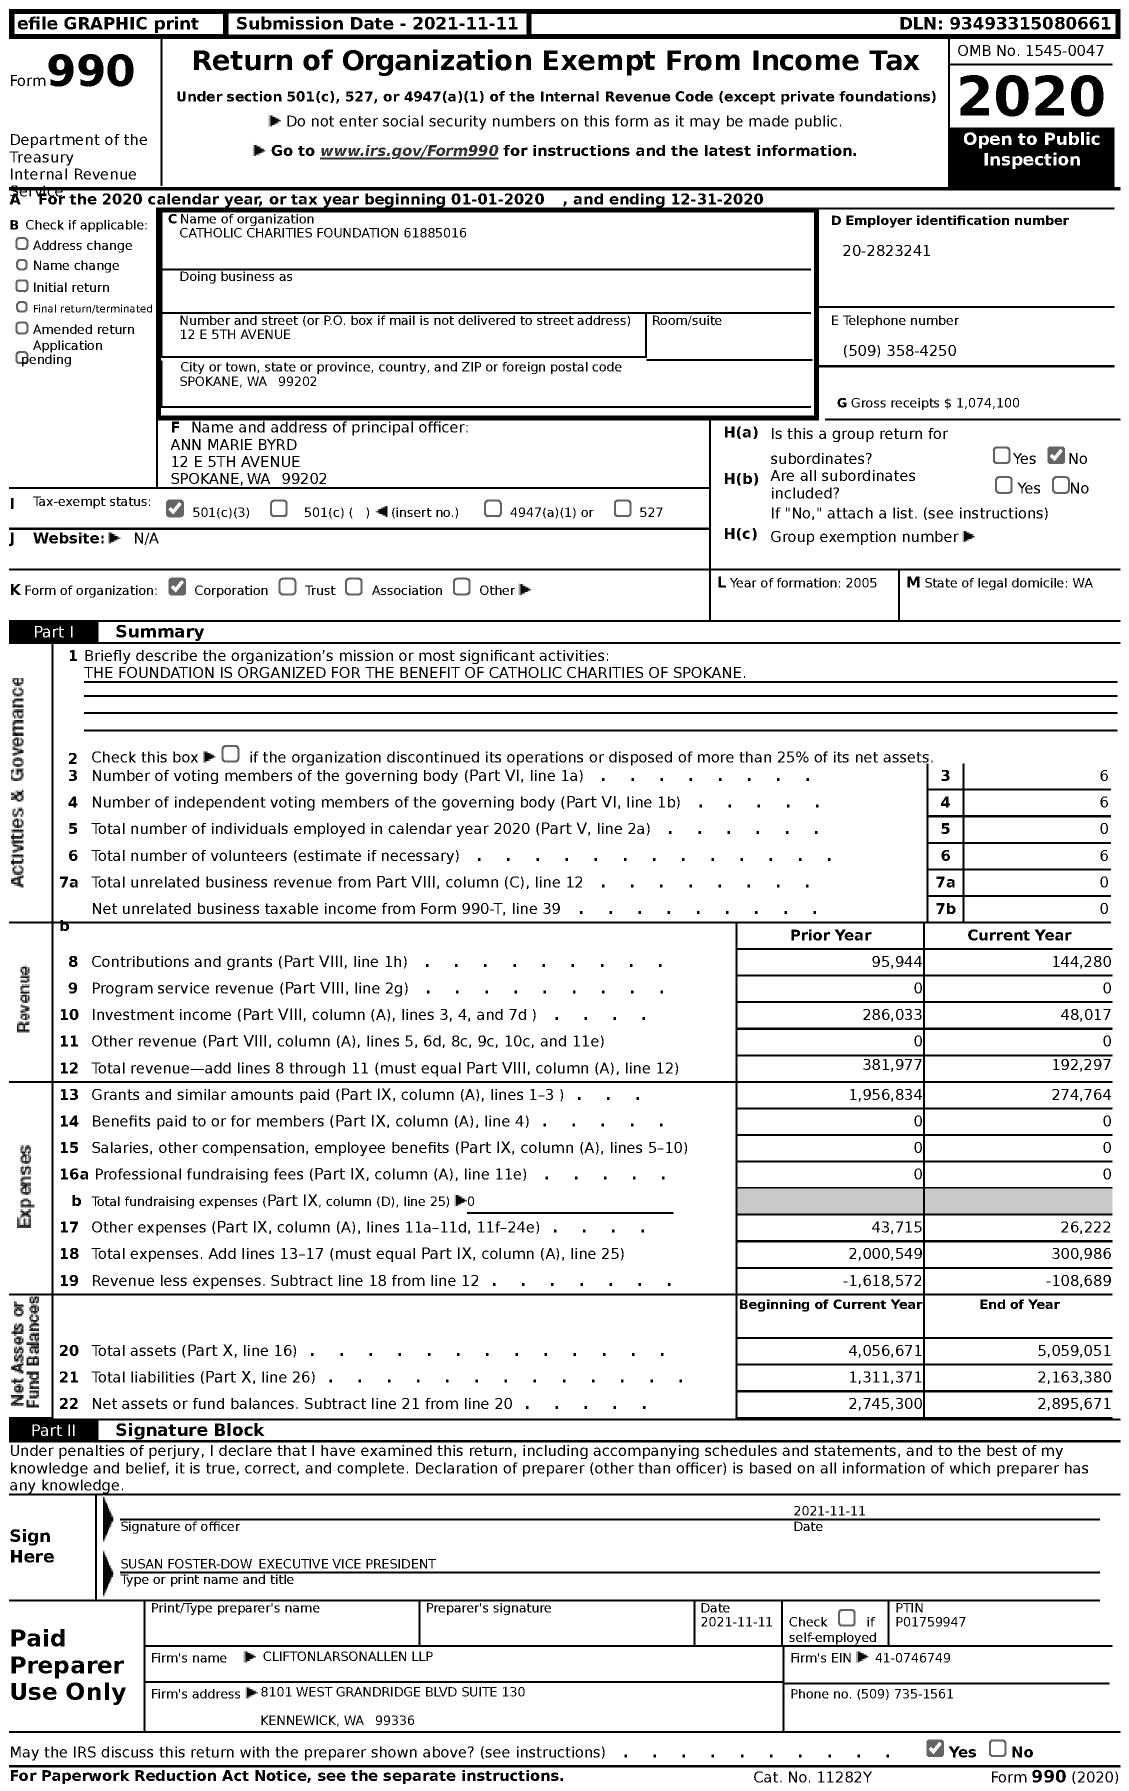 Image of first page of 2020 Form 990 for Catholic Charities Foundation 61885016